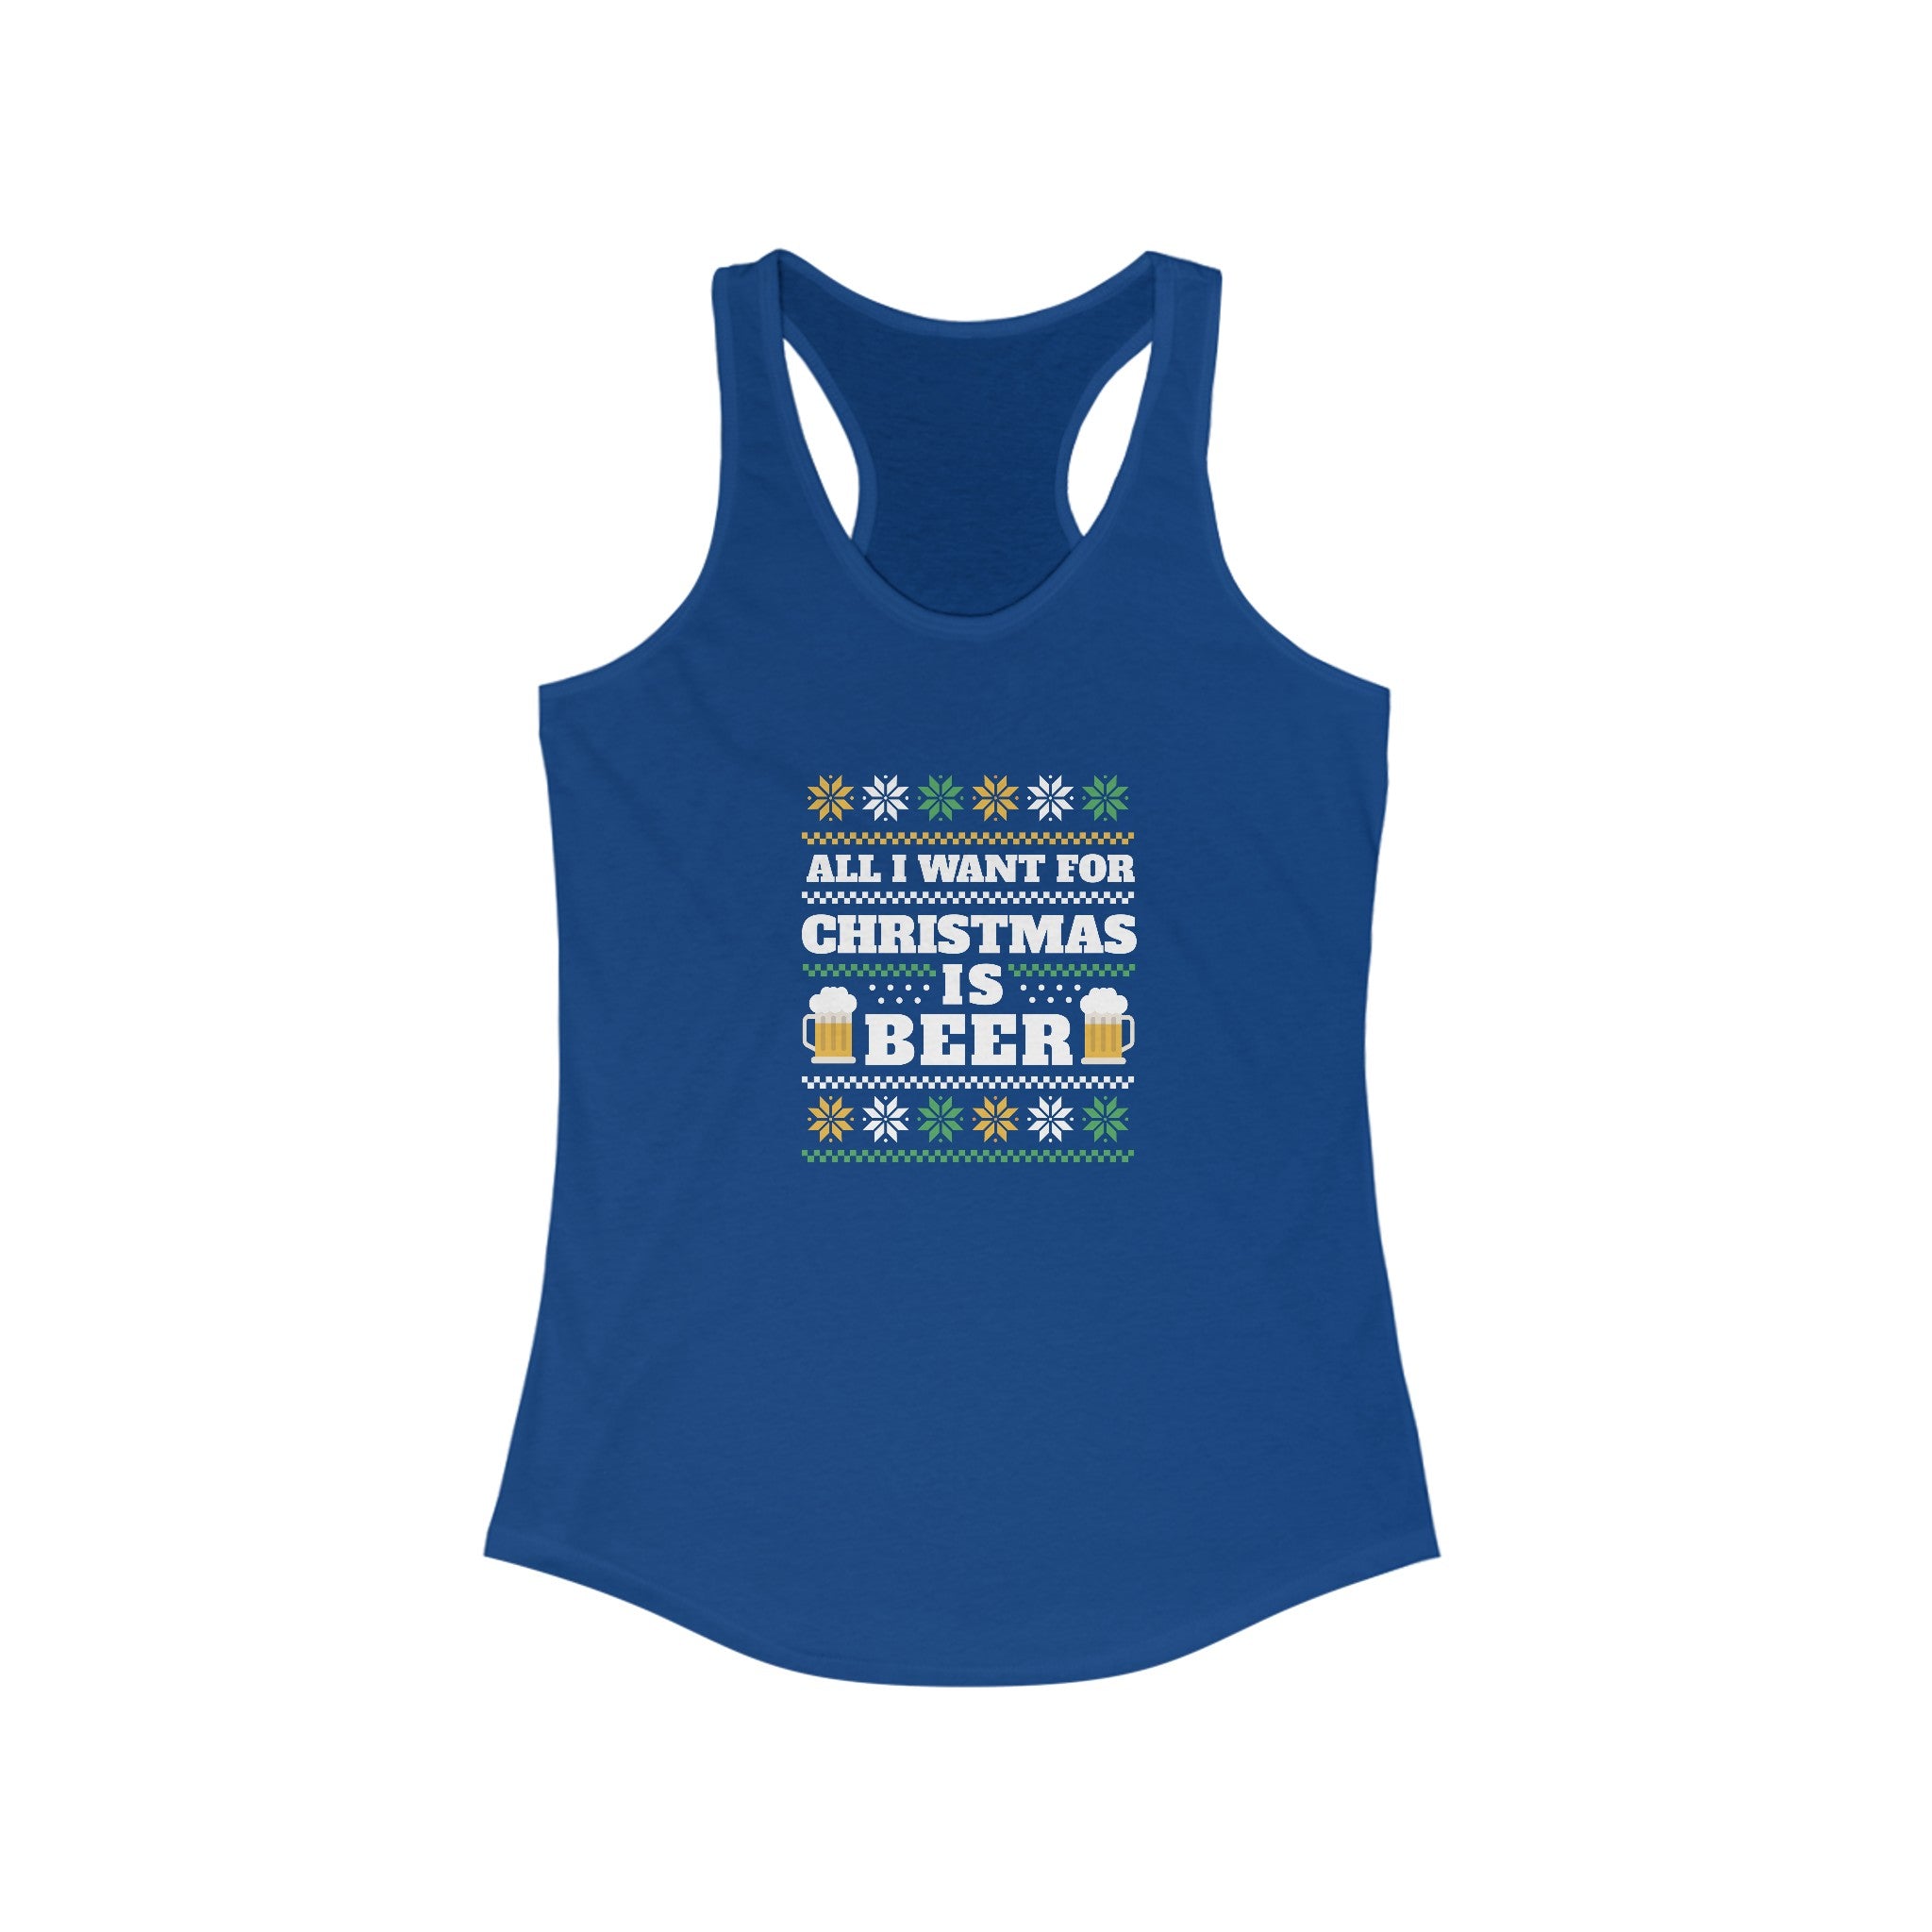 Beer Ugly Sweater - Women's Racerback Tank in blue with a holiday-themed design and the phrase "All I want for Christmas is Beer" printed in festive colors, perfect for an active lifestyle or pairing with your favorite beer ugly sweater.